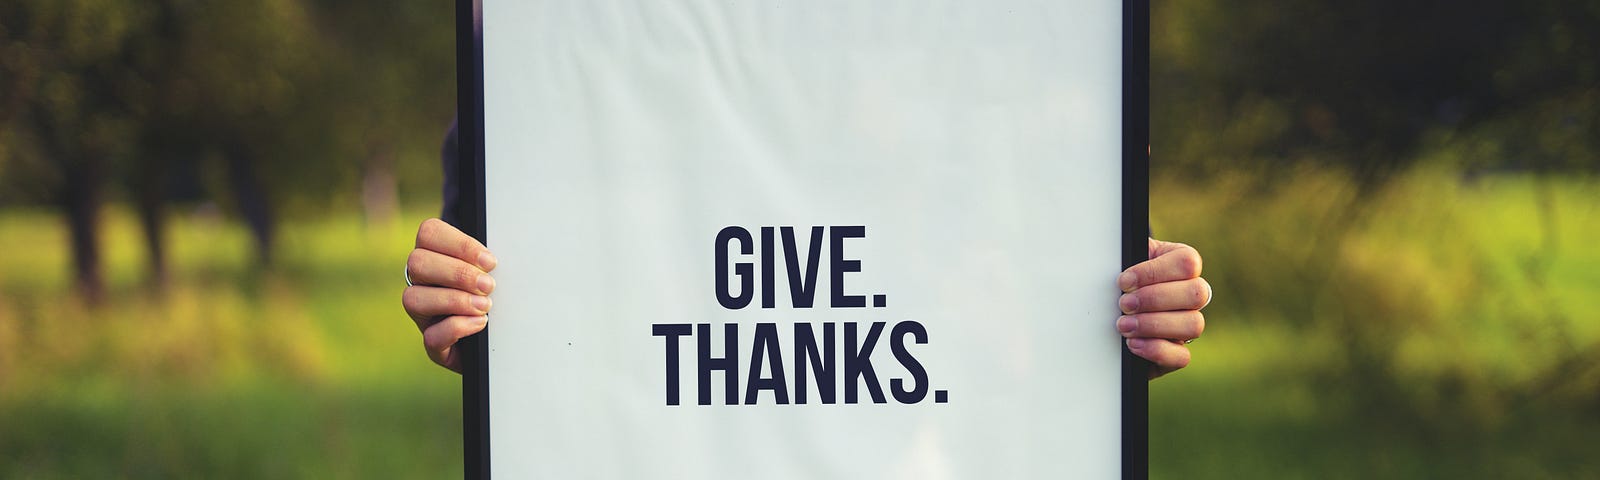 Always remember to be thankful!